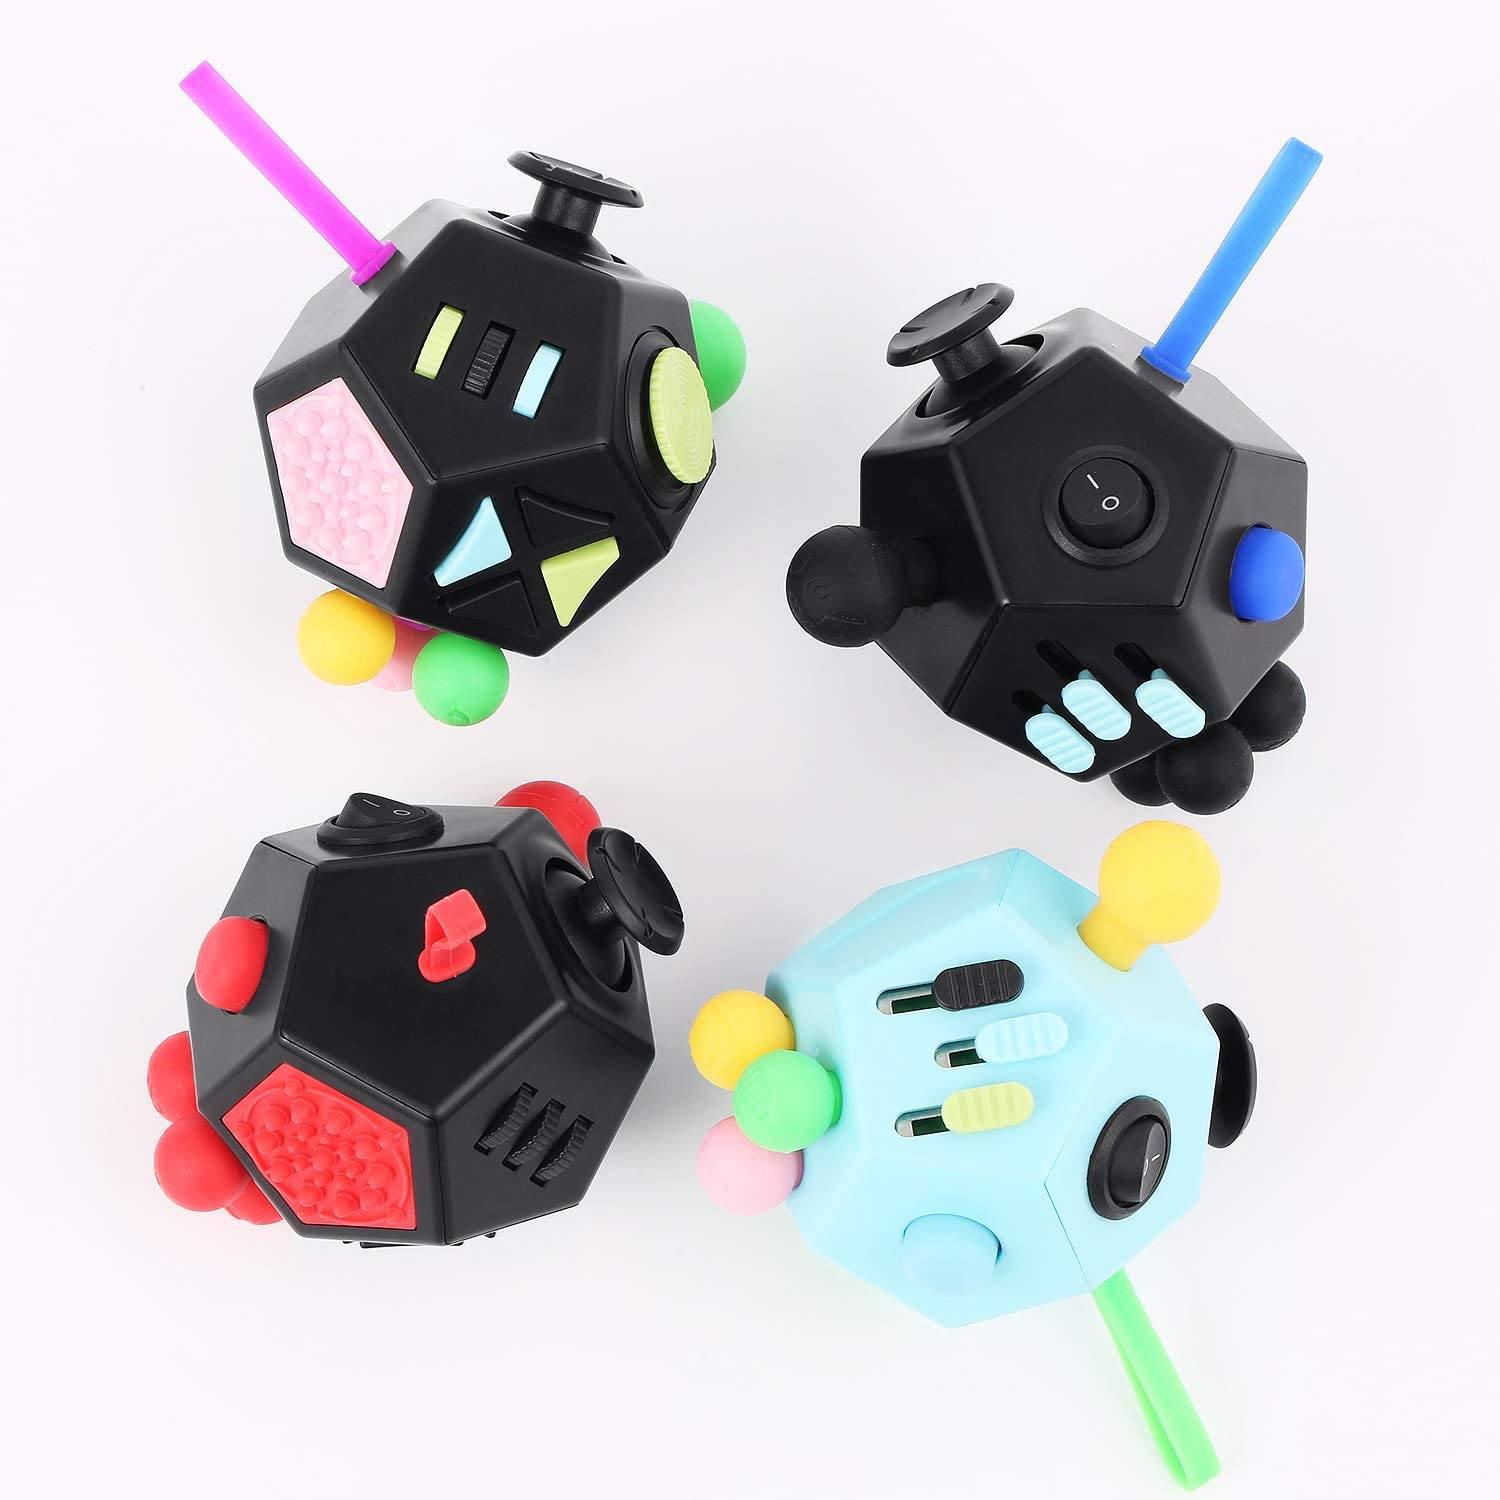 Stress and Anxiety Relief Depression Anti for All Ages with ADHD ADD OCD Autism Best Toy 12 Sided Fidget Cube Dodecagon Fidget Toy for Children and Adults Black